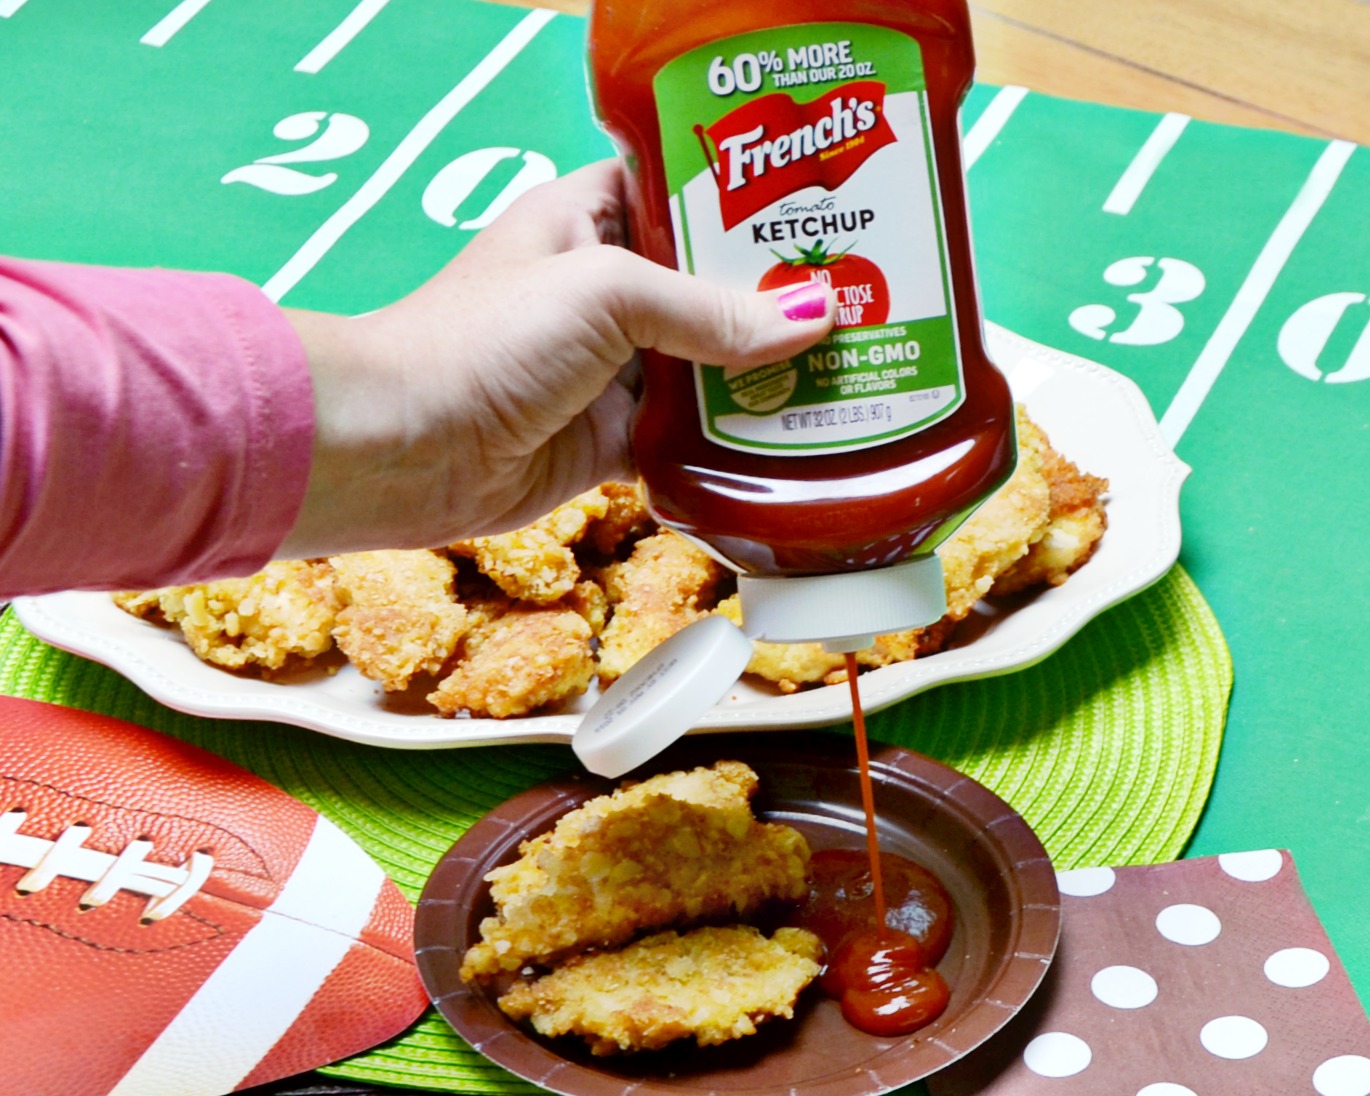 Big Game Chicken Strips and ketchup